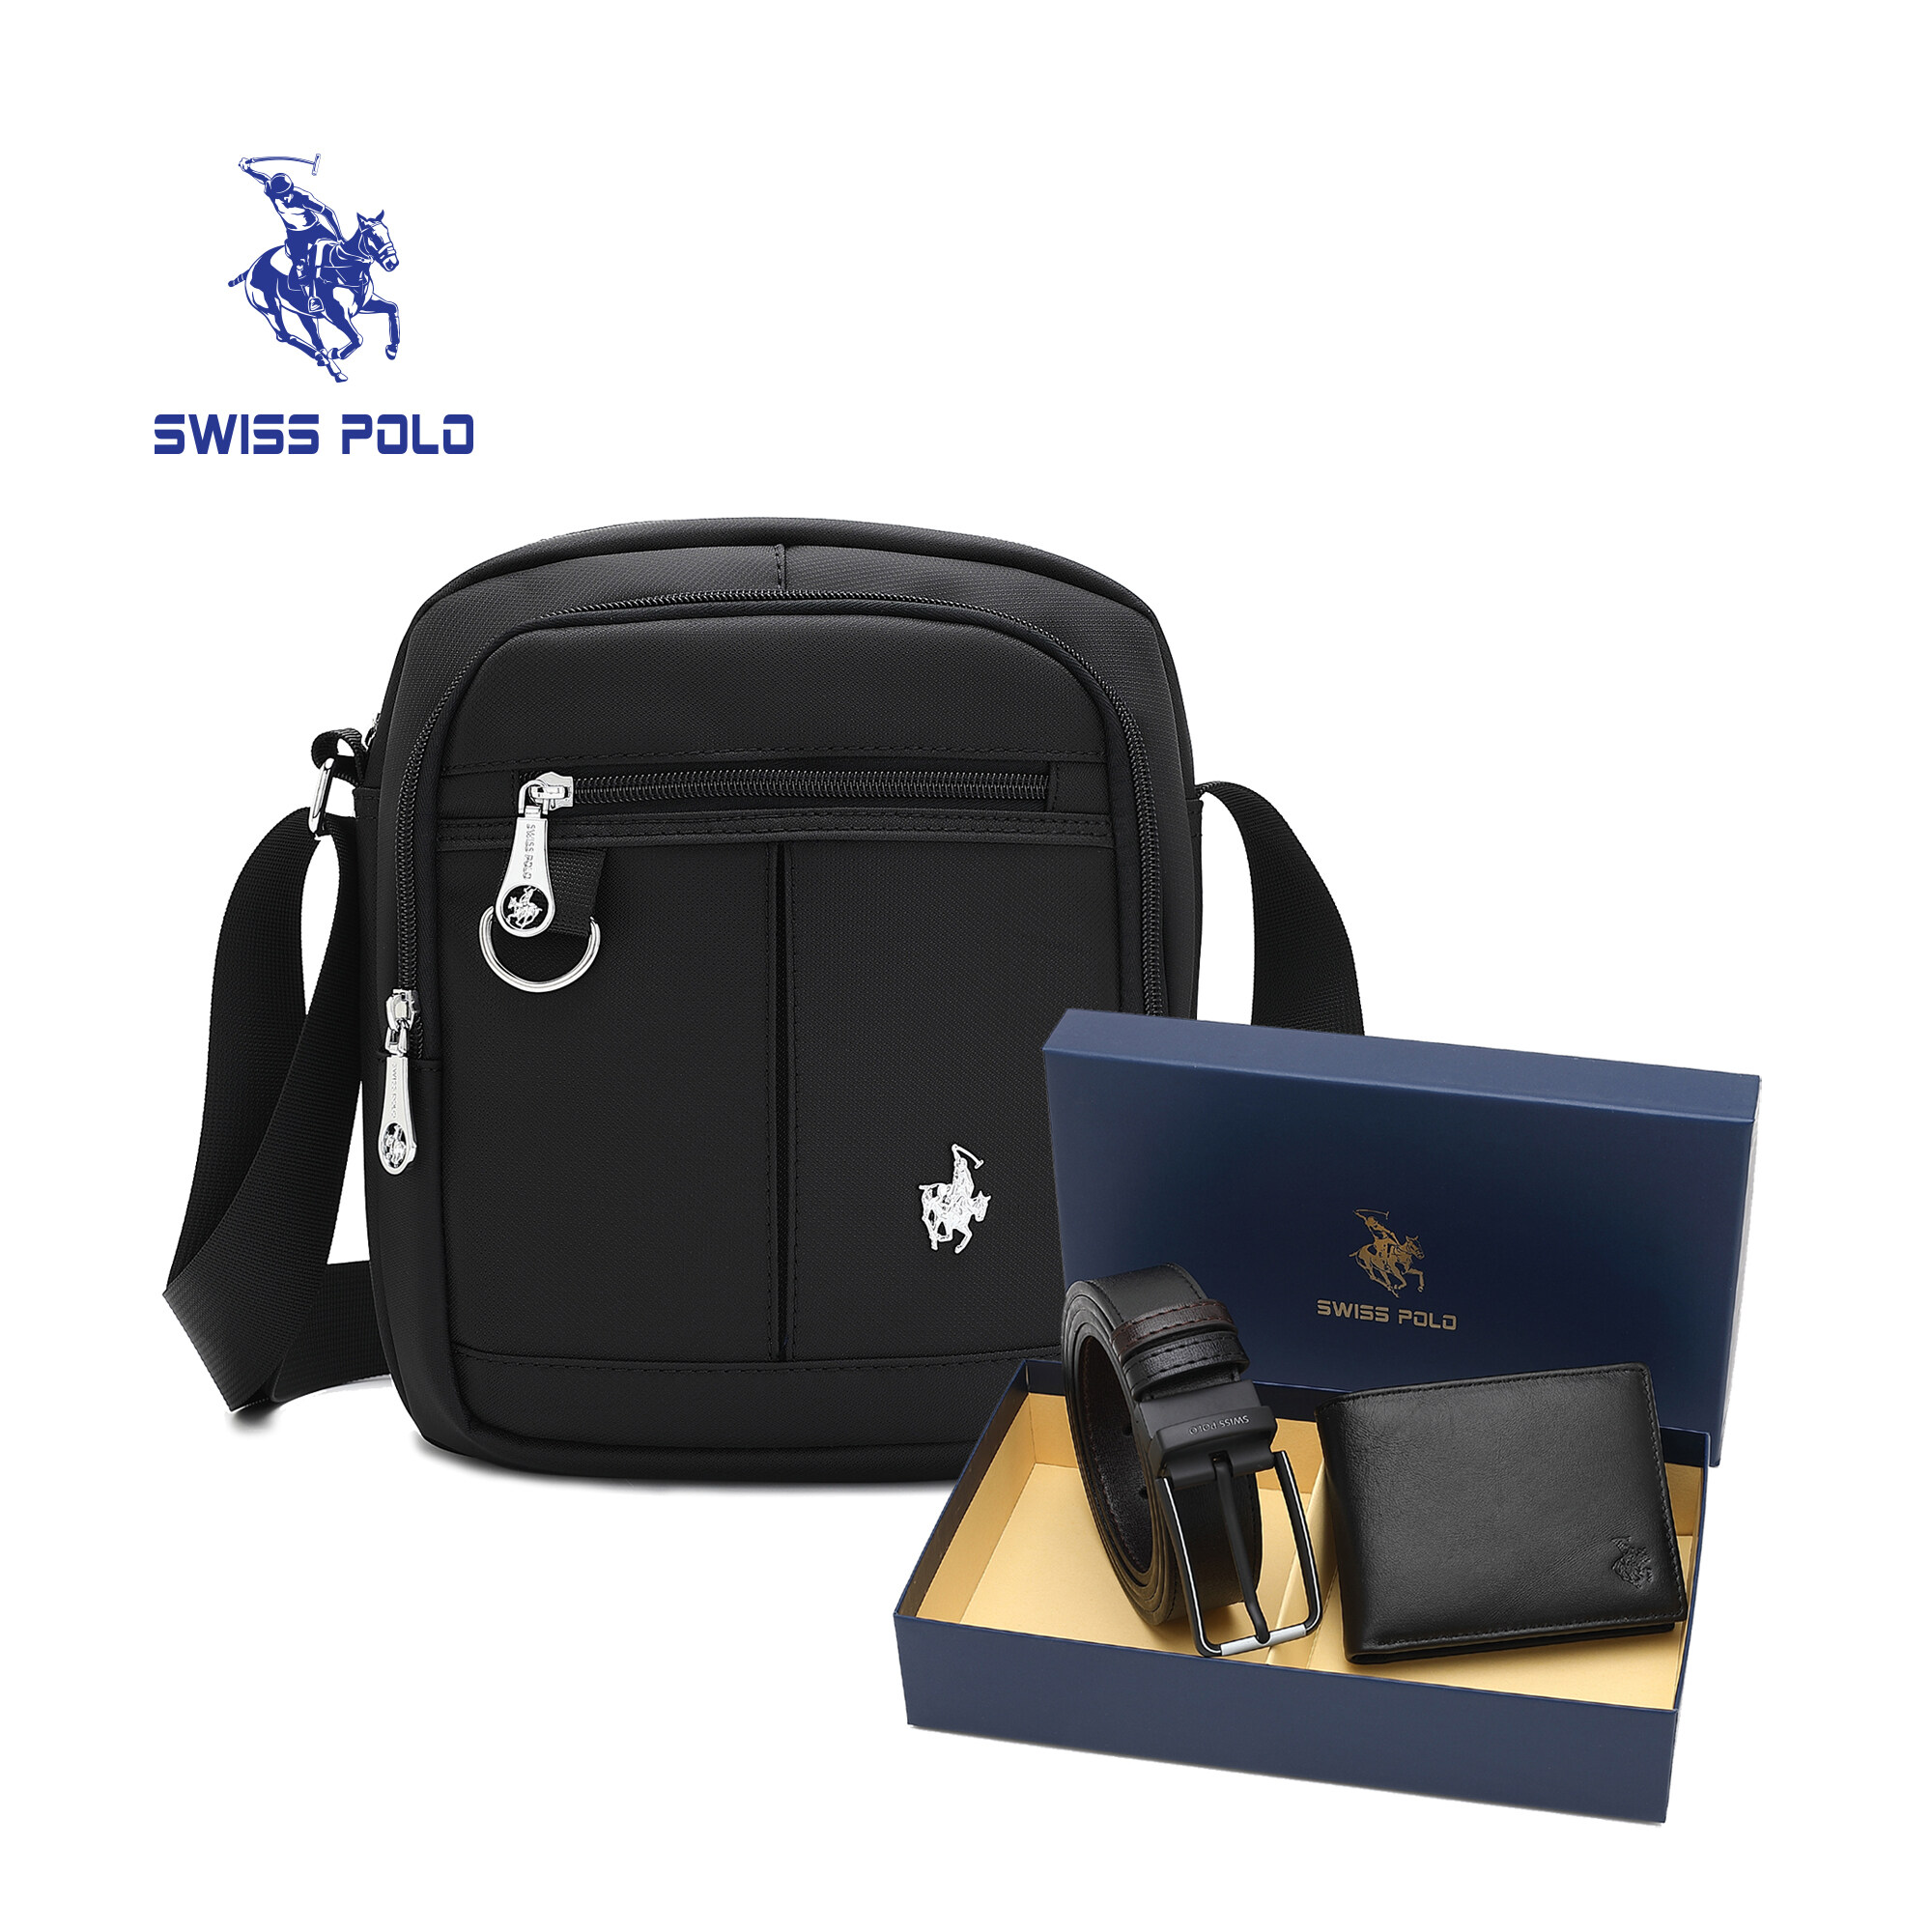 SWISS POLO Gift Set/ Box Chestbag And Genuine Leather Bifold Wallet With Belt SGS 563-4 BLUE/GREY